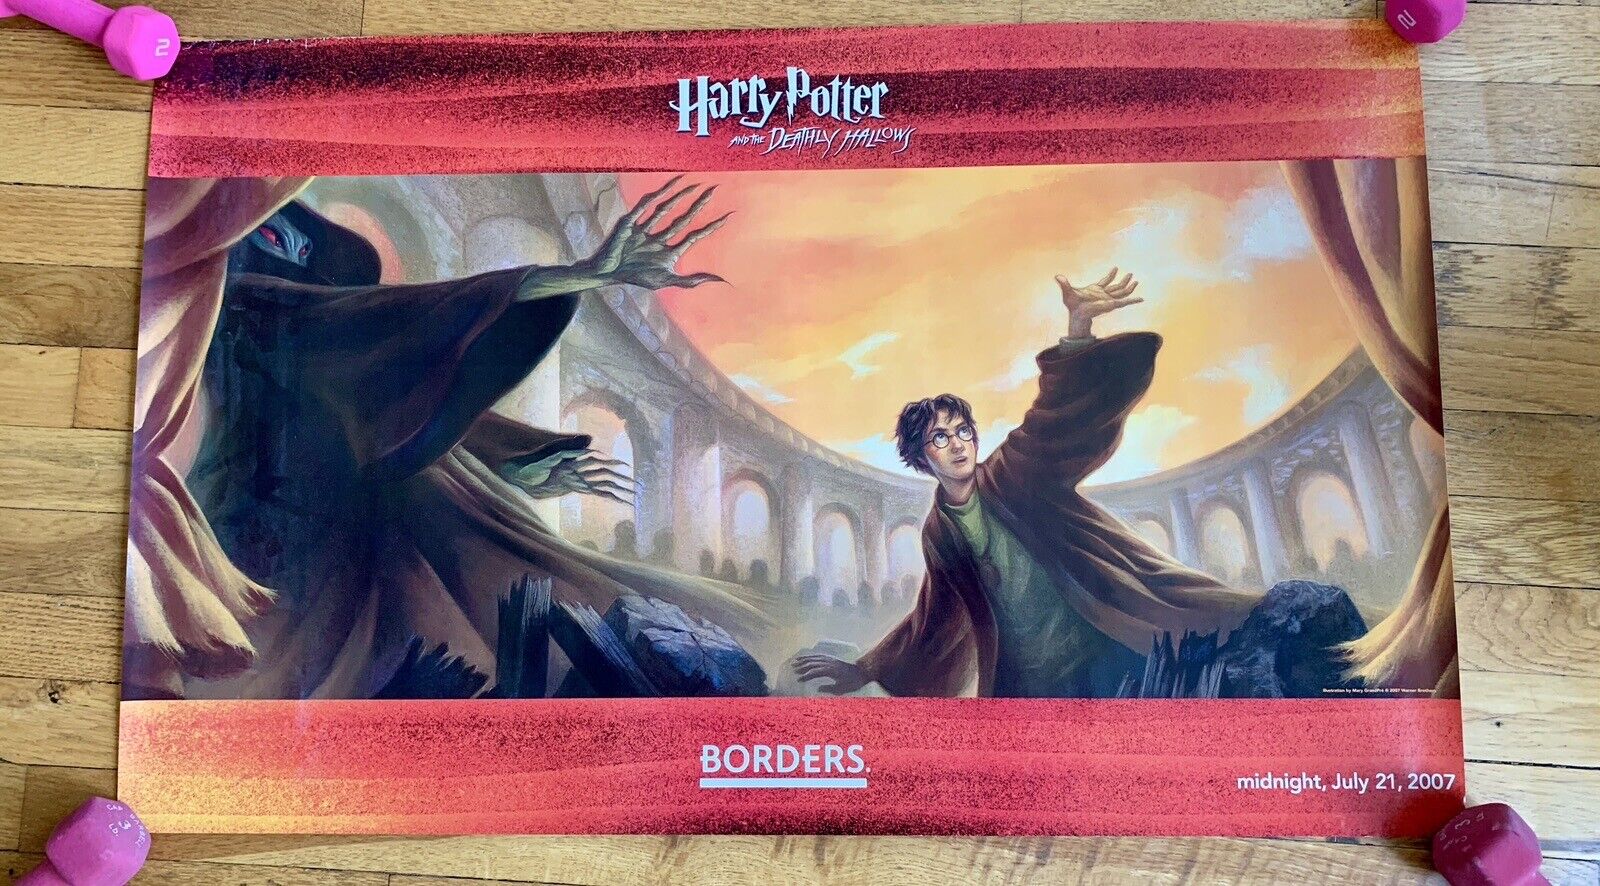 Vintage 2007 HARRY POTTER and The Deadly Hallows Poster, Borders Books Promo